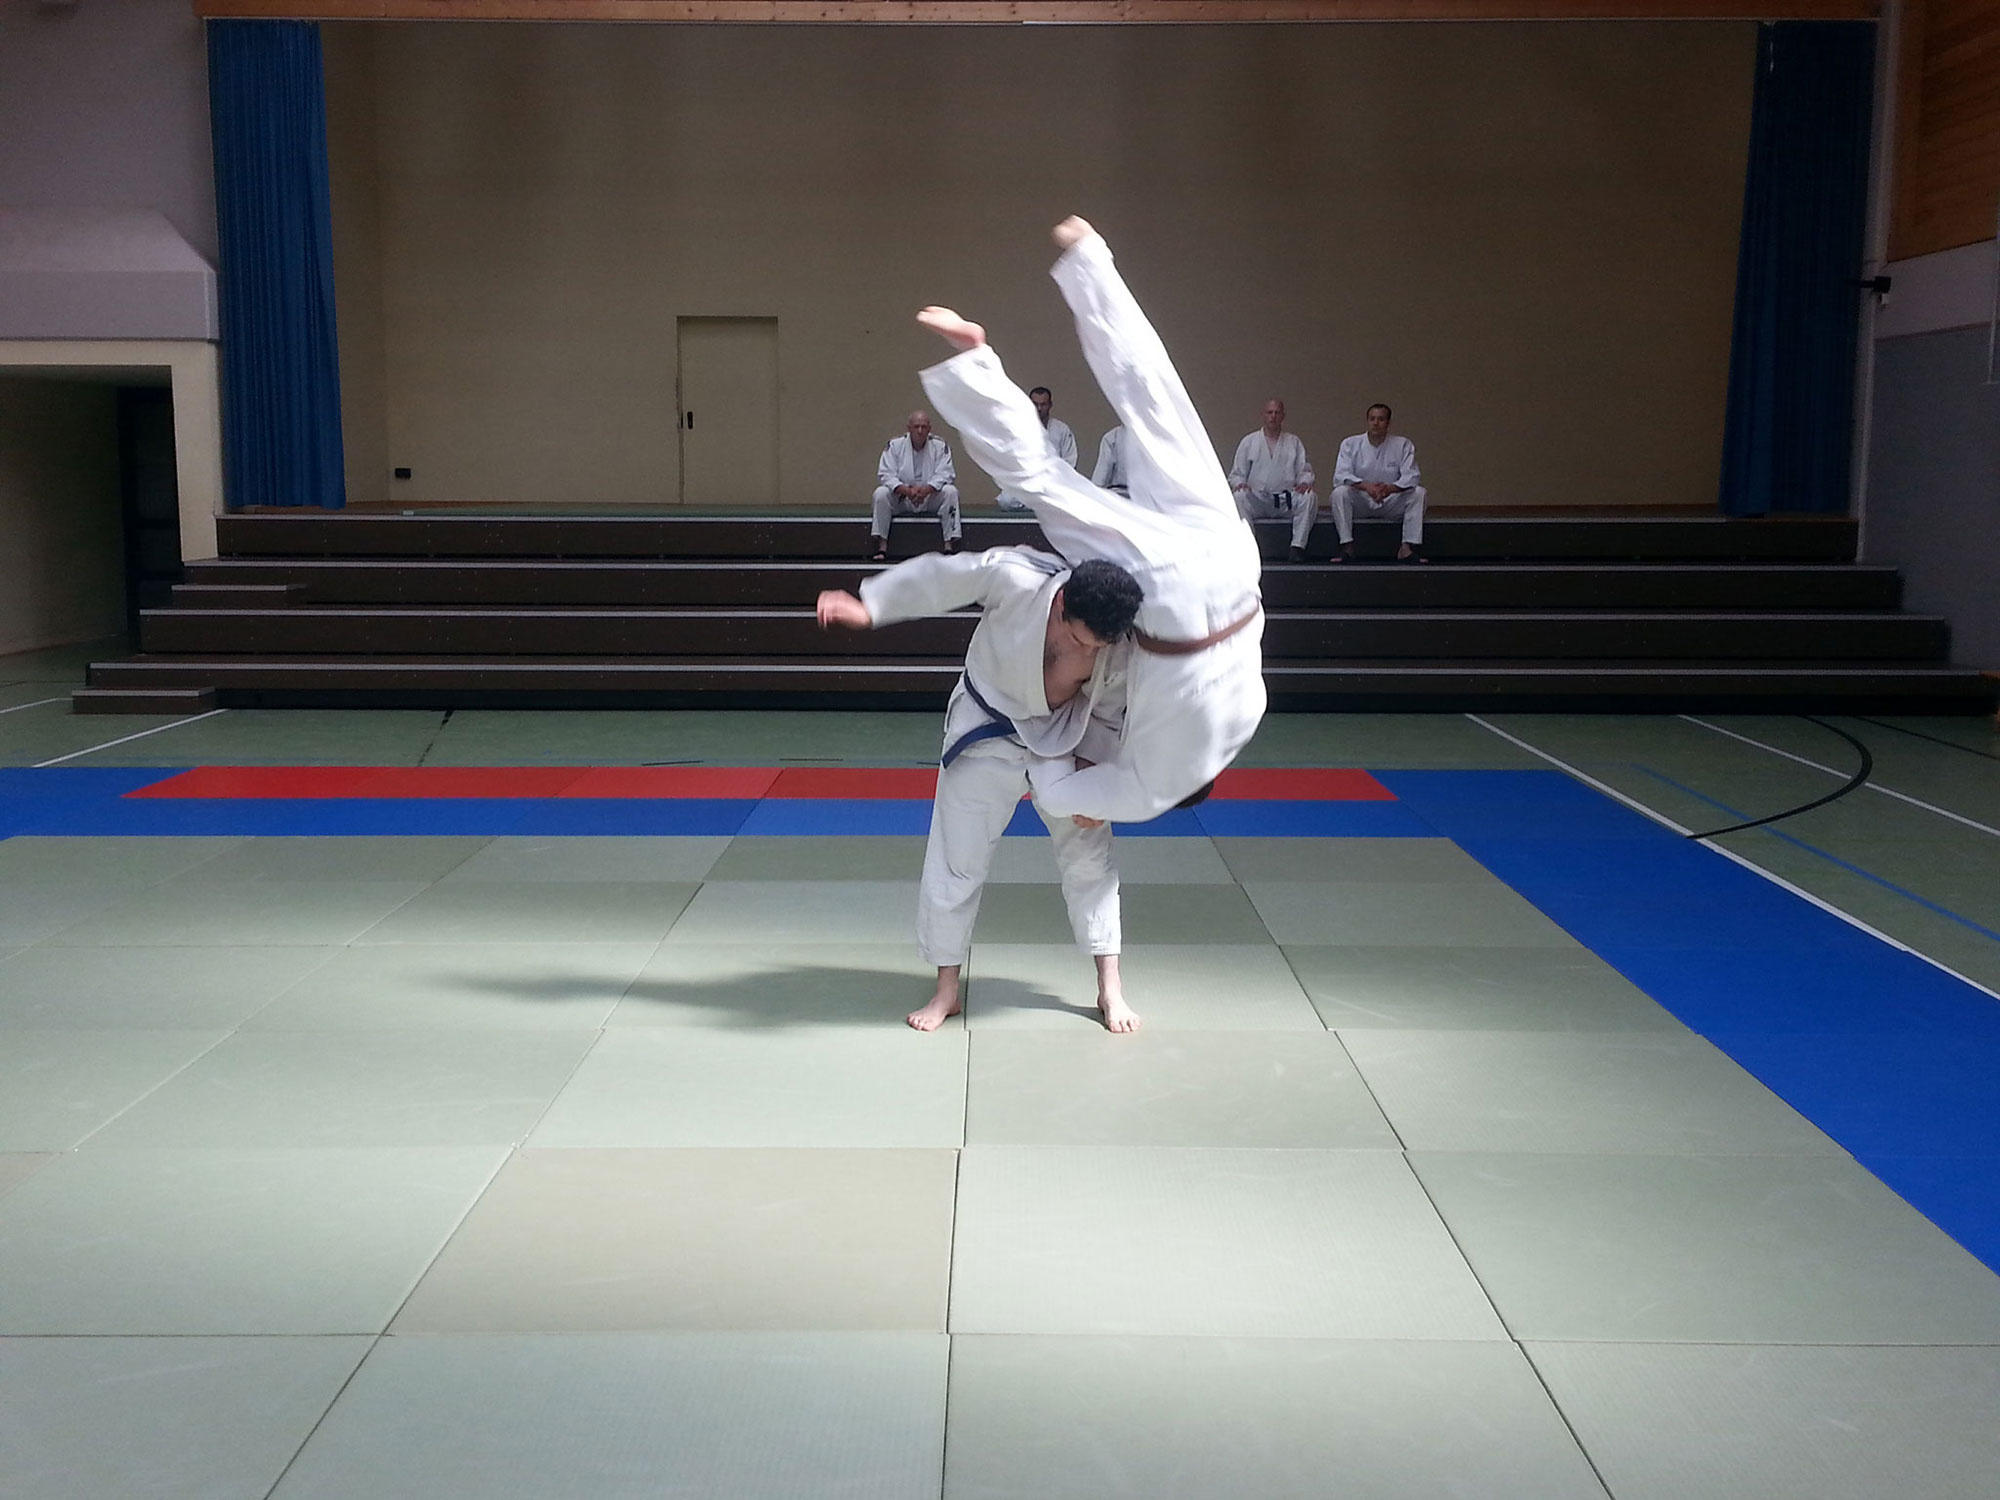 Judo: A "gentle way", A system of unarmed combat, Modern Japanese martial art, Olympic sport. 2000x1500 HD Wallpaper.